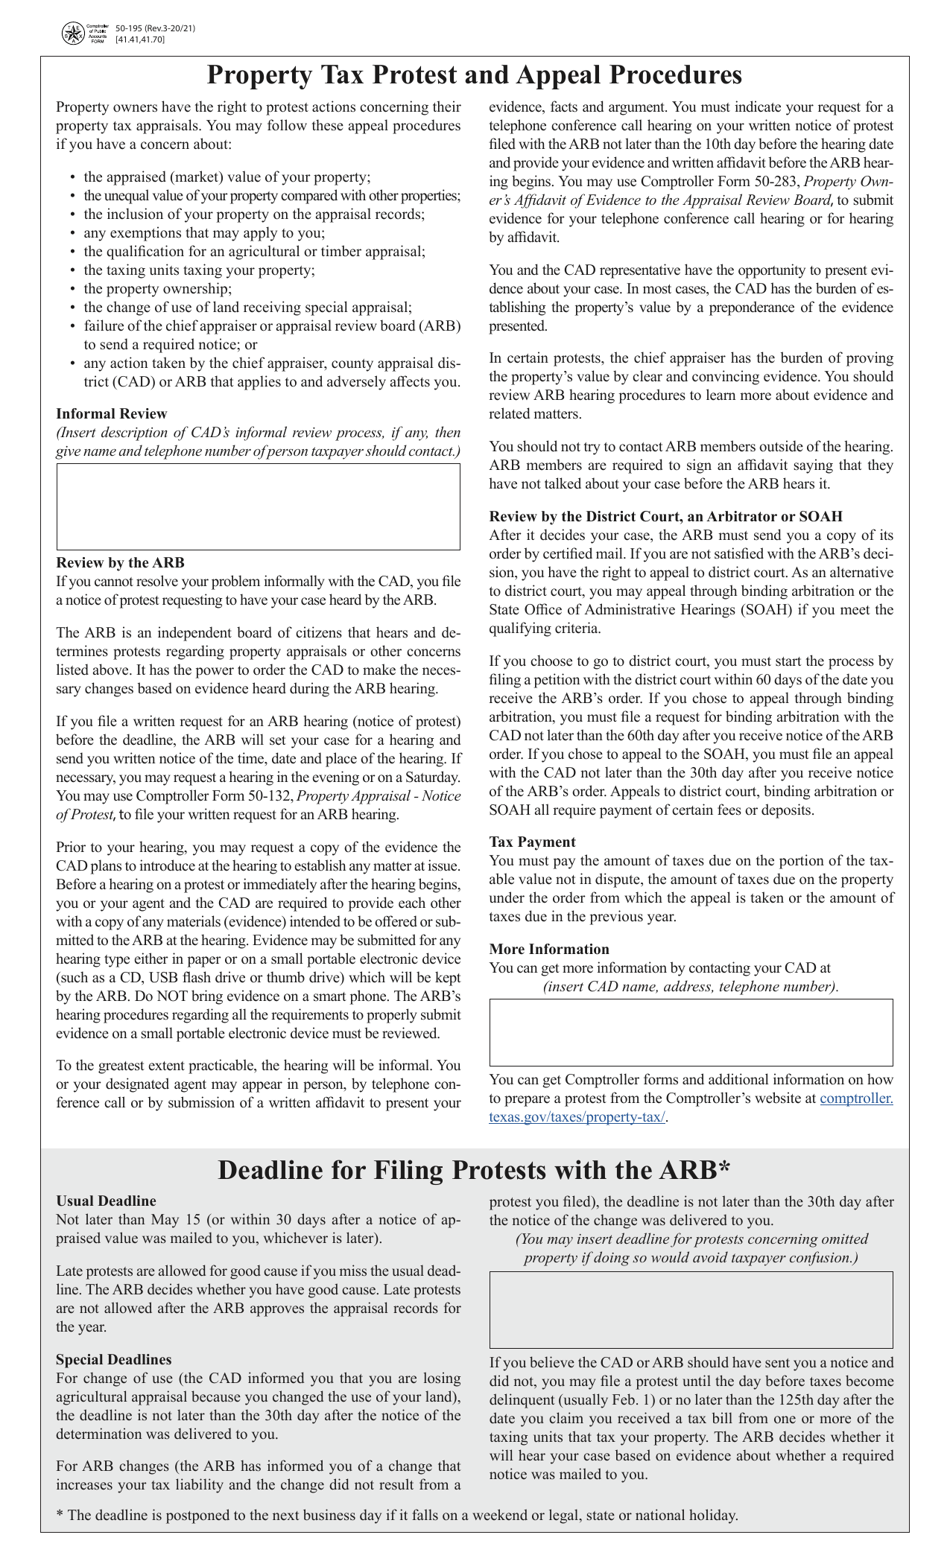 Form 50-195 Property Tax Protest and Appeal Procedures - Texas, Page 1